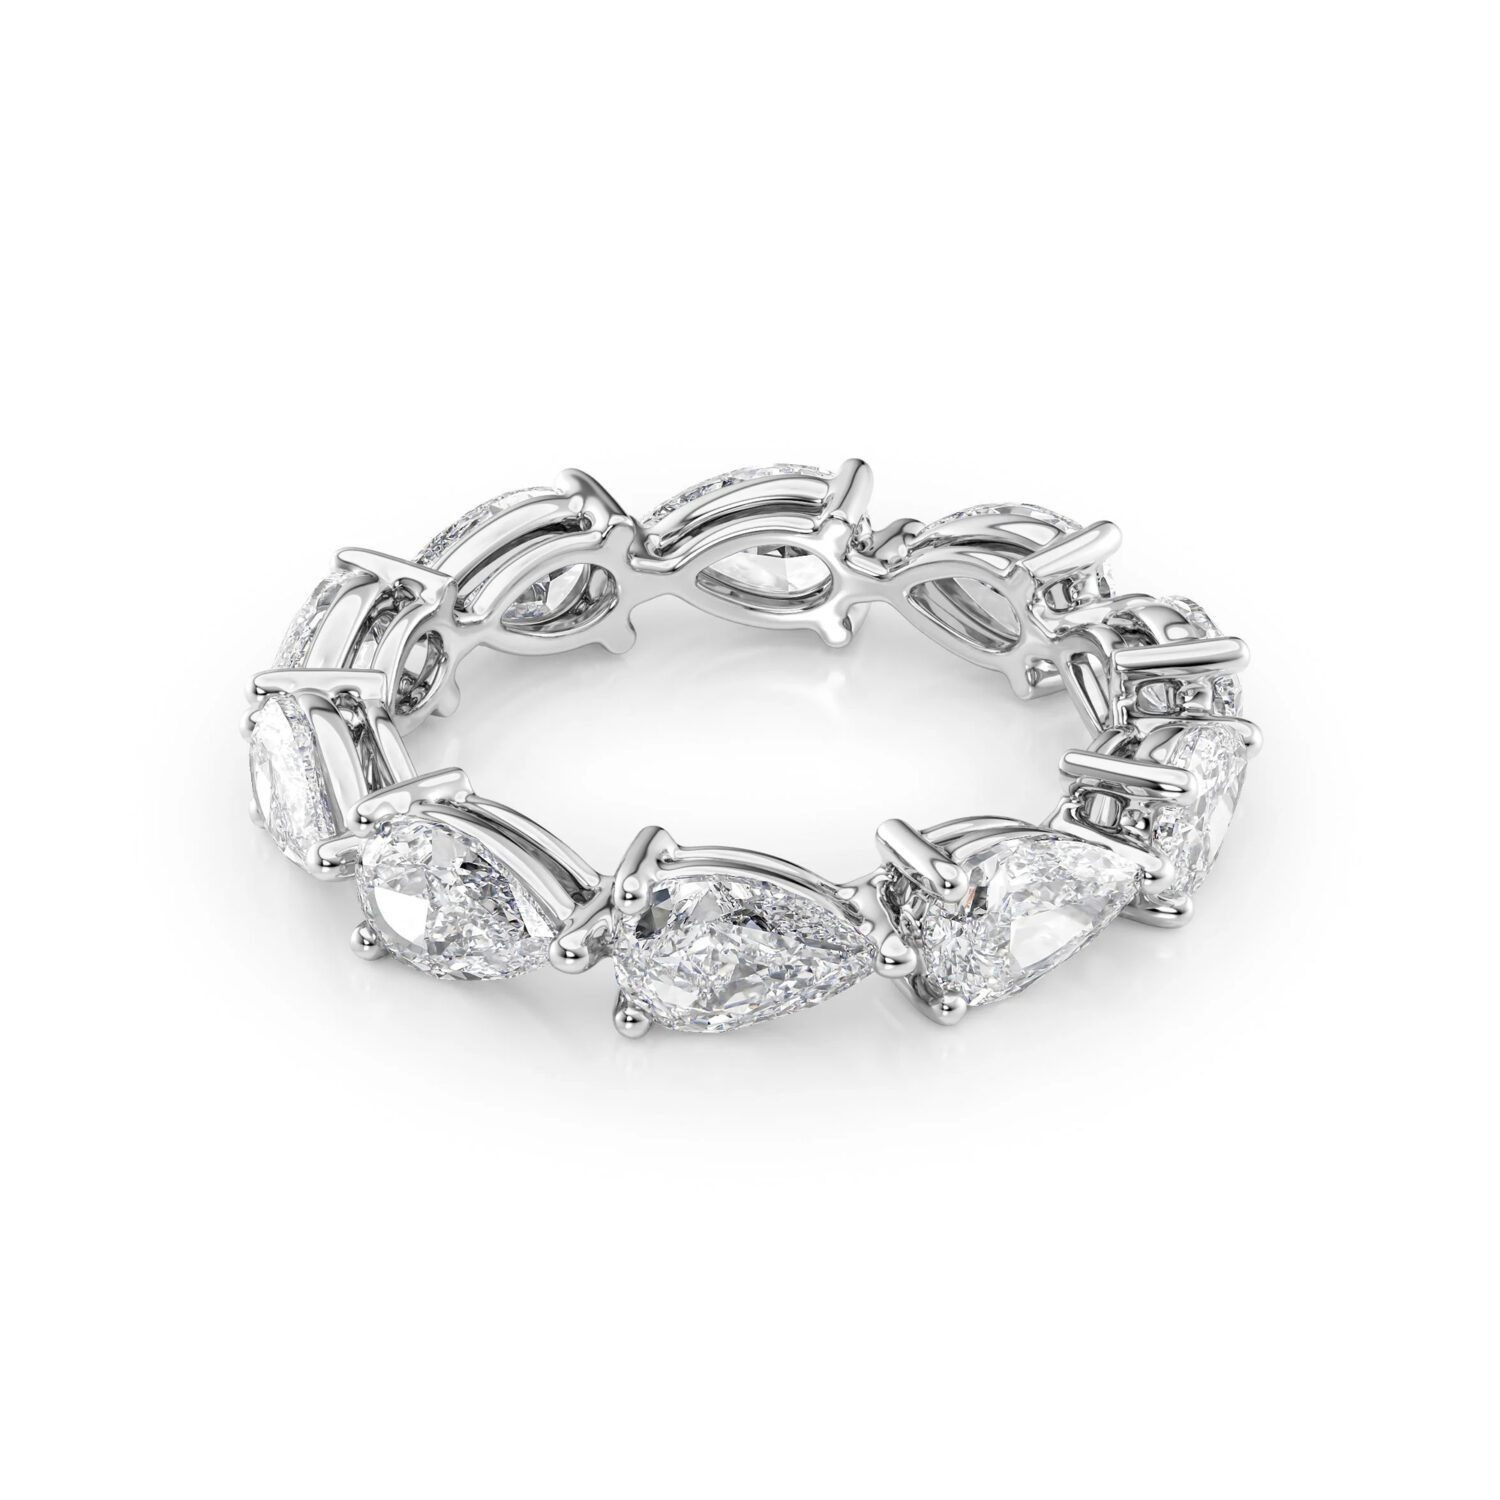 Lab grown diamonds in Cyprus - The East West Pear Cut 1.2ct/ 2ct/ 3ct or 4ct Full Eternity Band Diamond Ring best quality and price